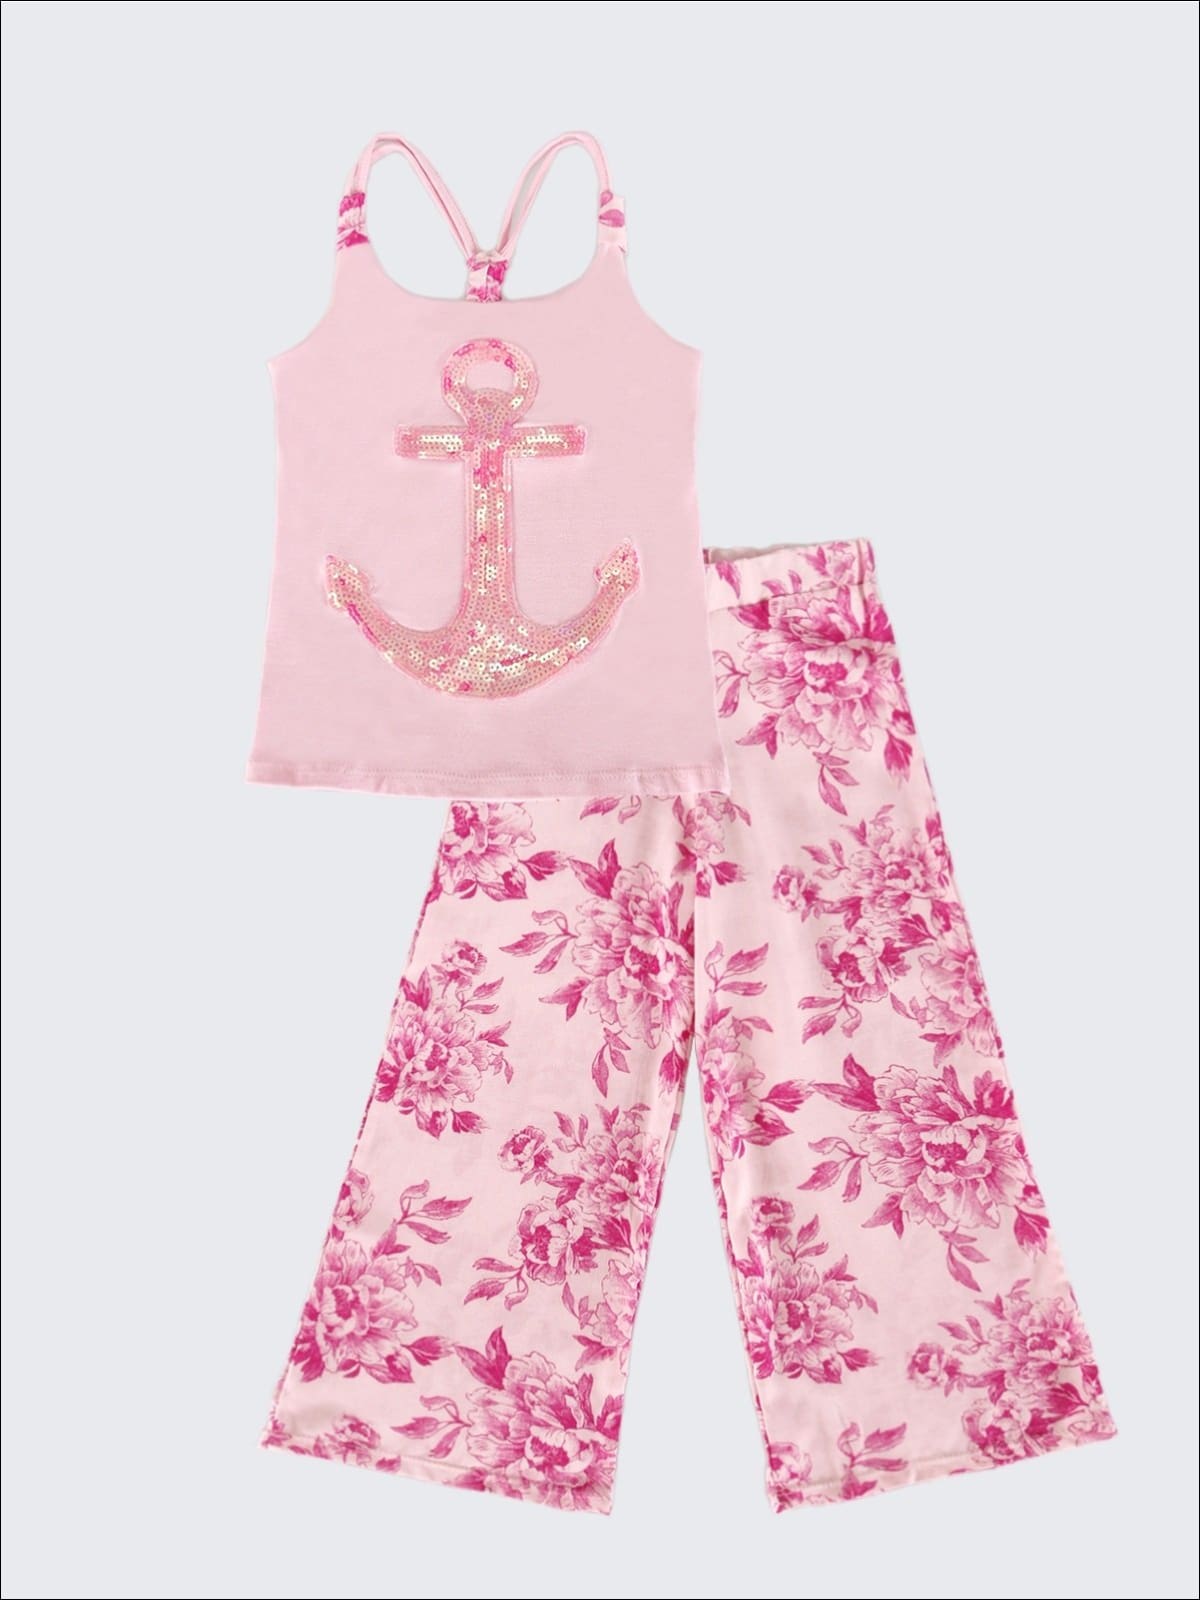 Girls Trimmed Scrunch Back Tank & Palazzo Pants Set - Pink / 2T/3T - Girls Spring Casual Set